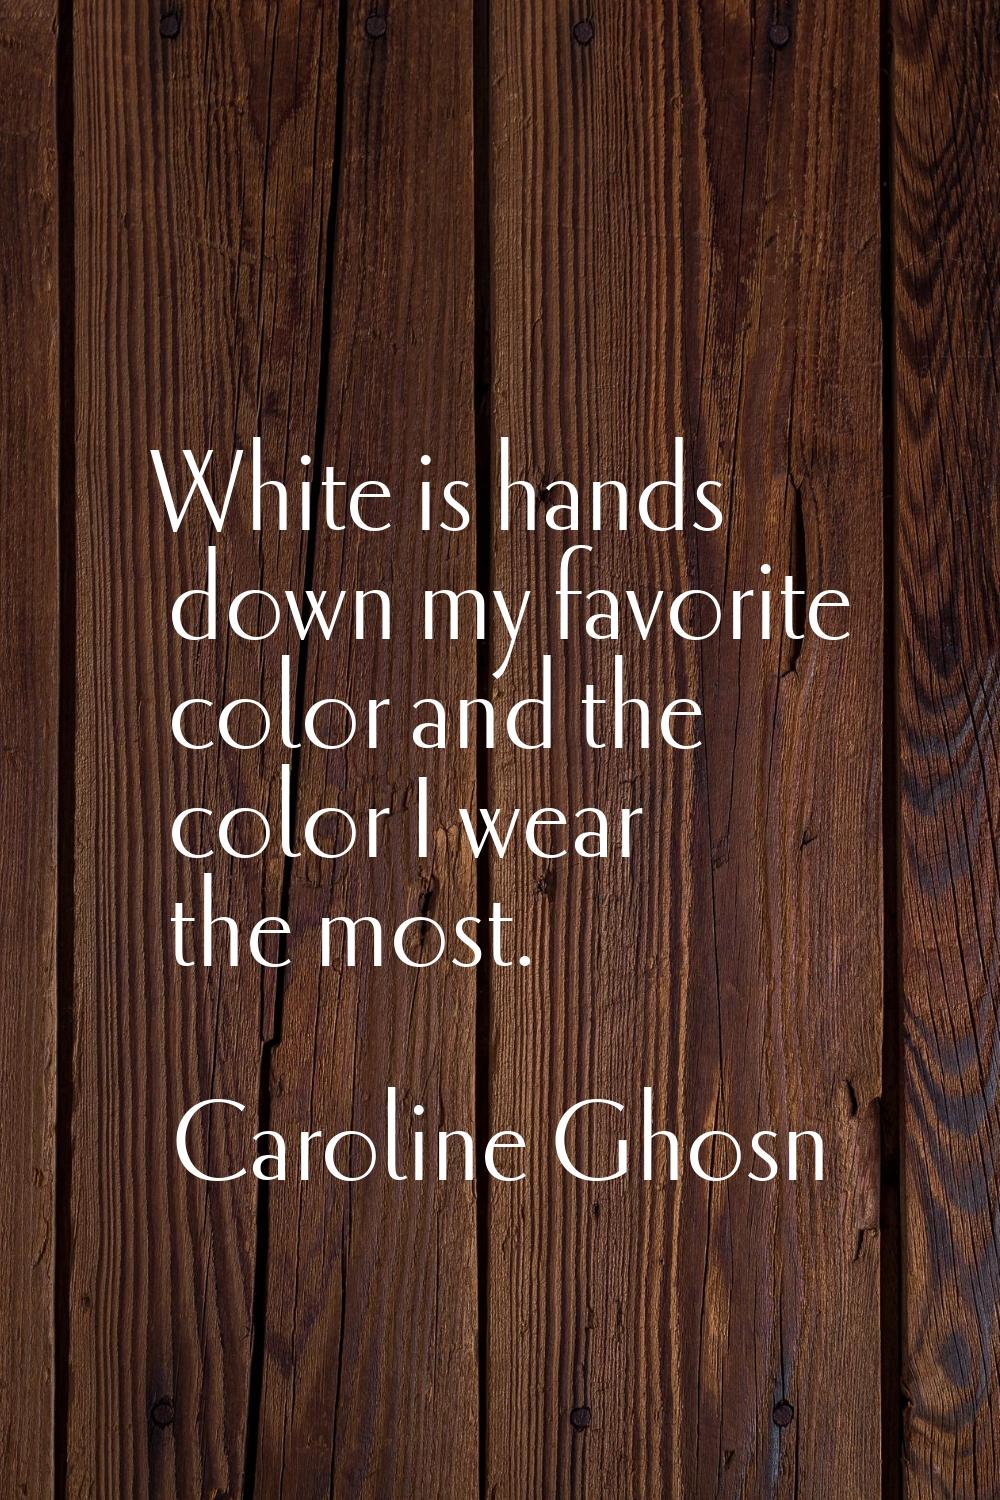 White is hands down my favorite color and the color I wear the most.